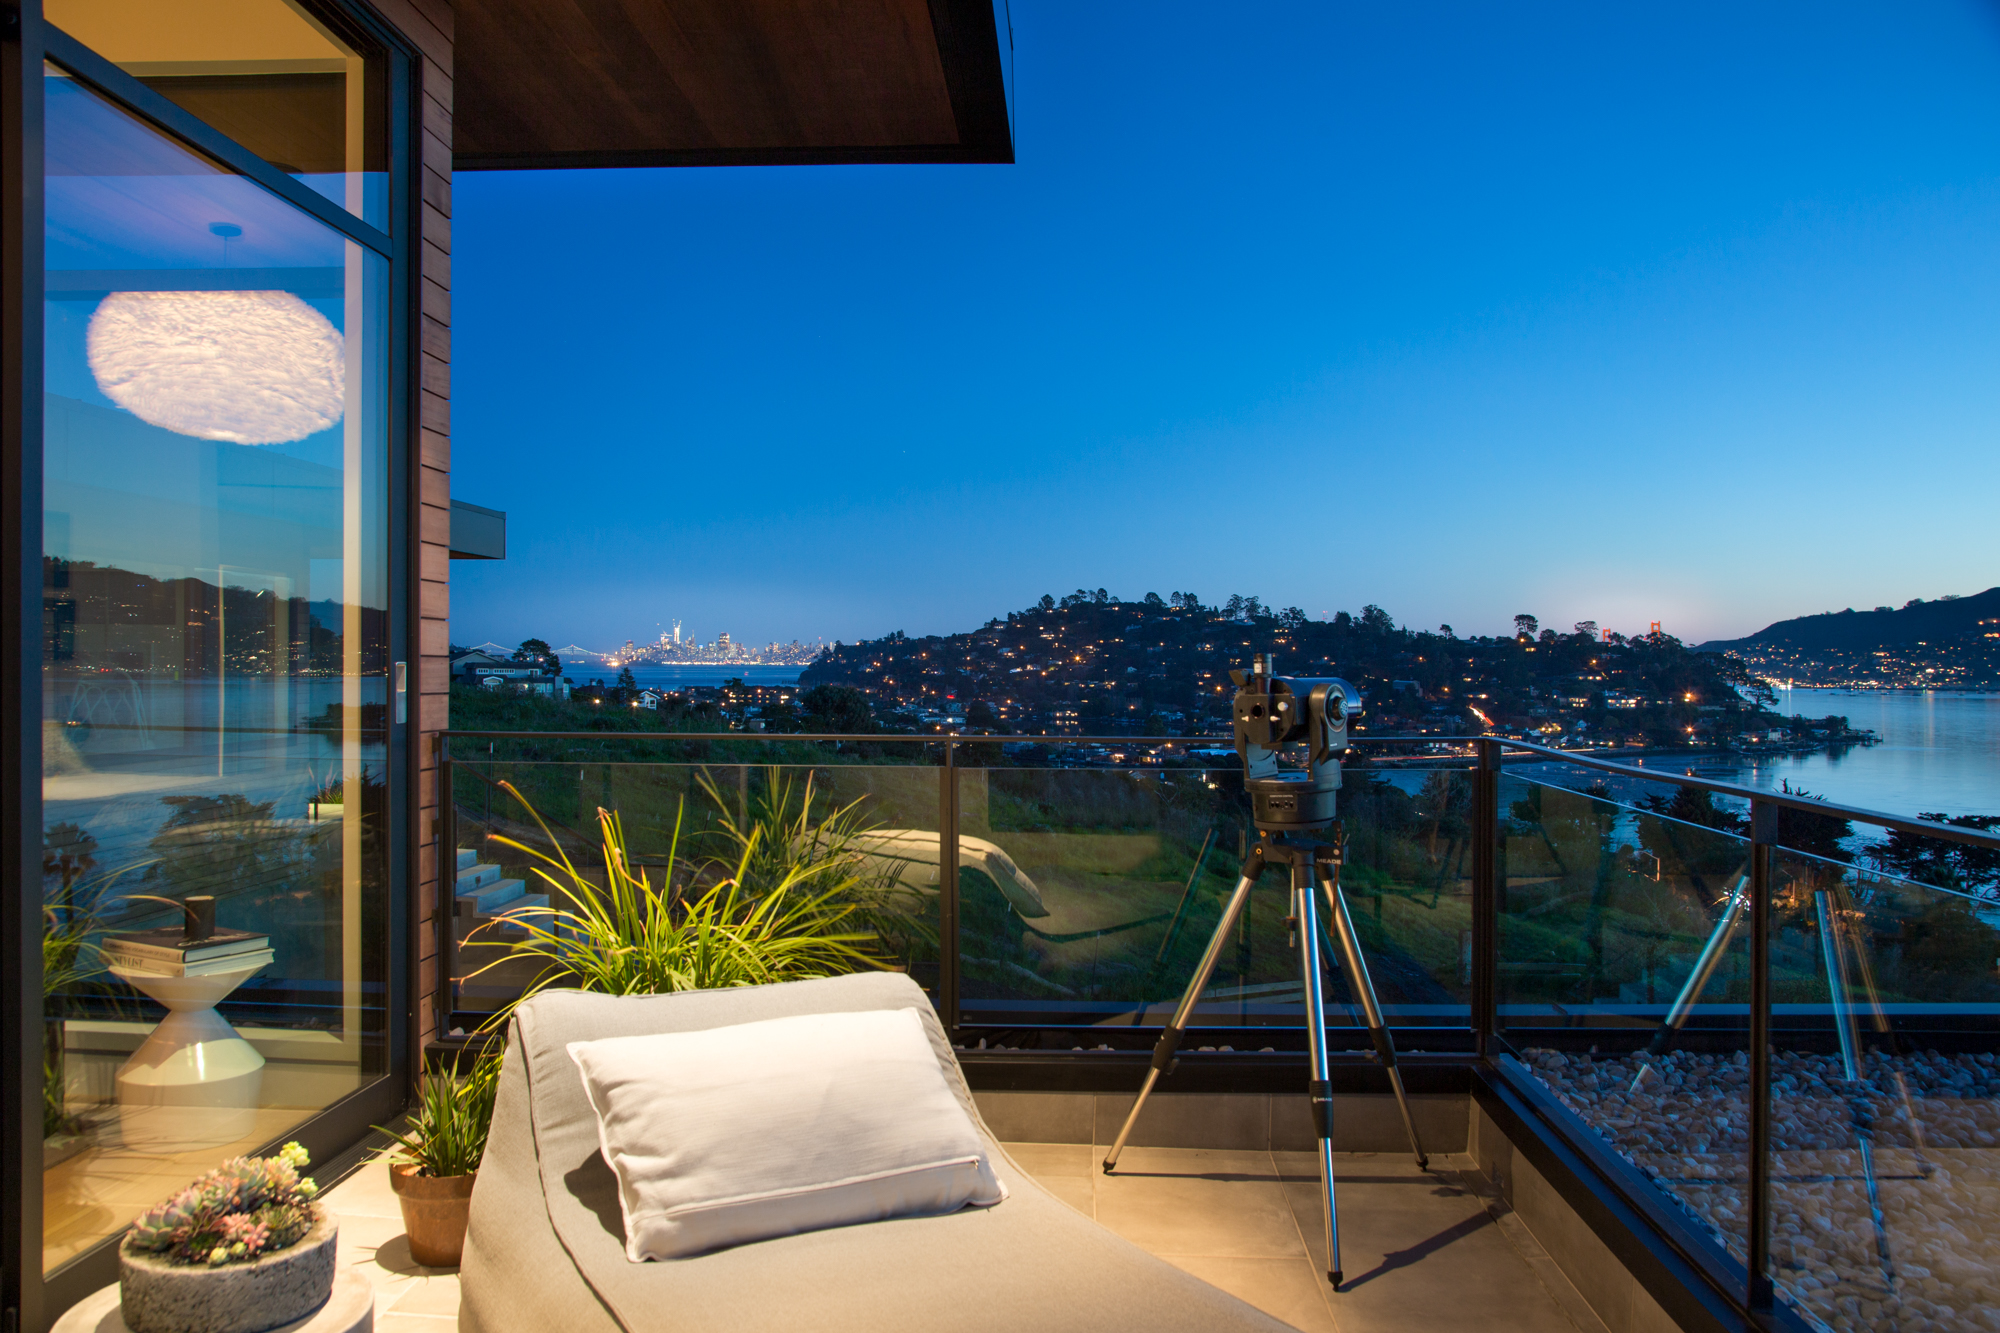 Tiburon Architectural Photography brightroomSF Studio Marcell Puzsar Architectural Photography twilight view of San Francisco-10.jpg